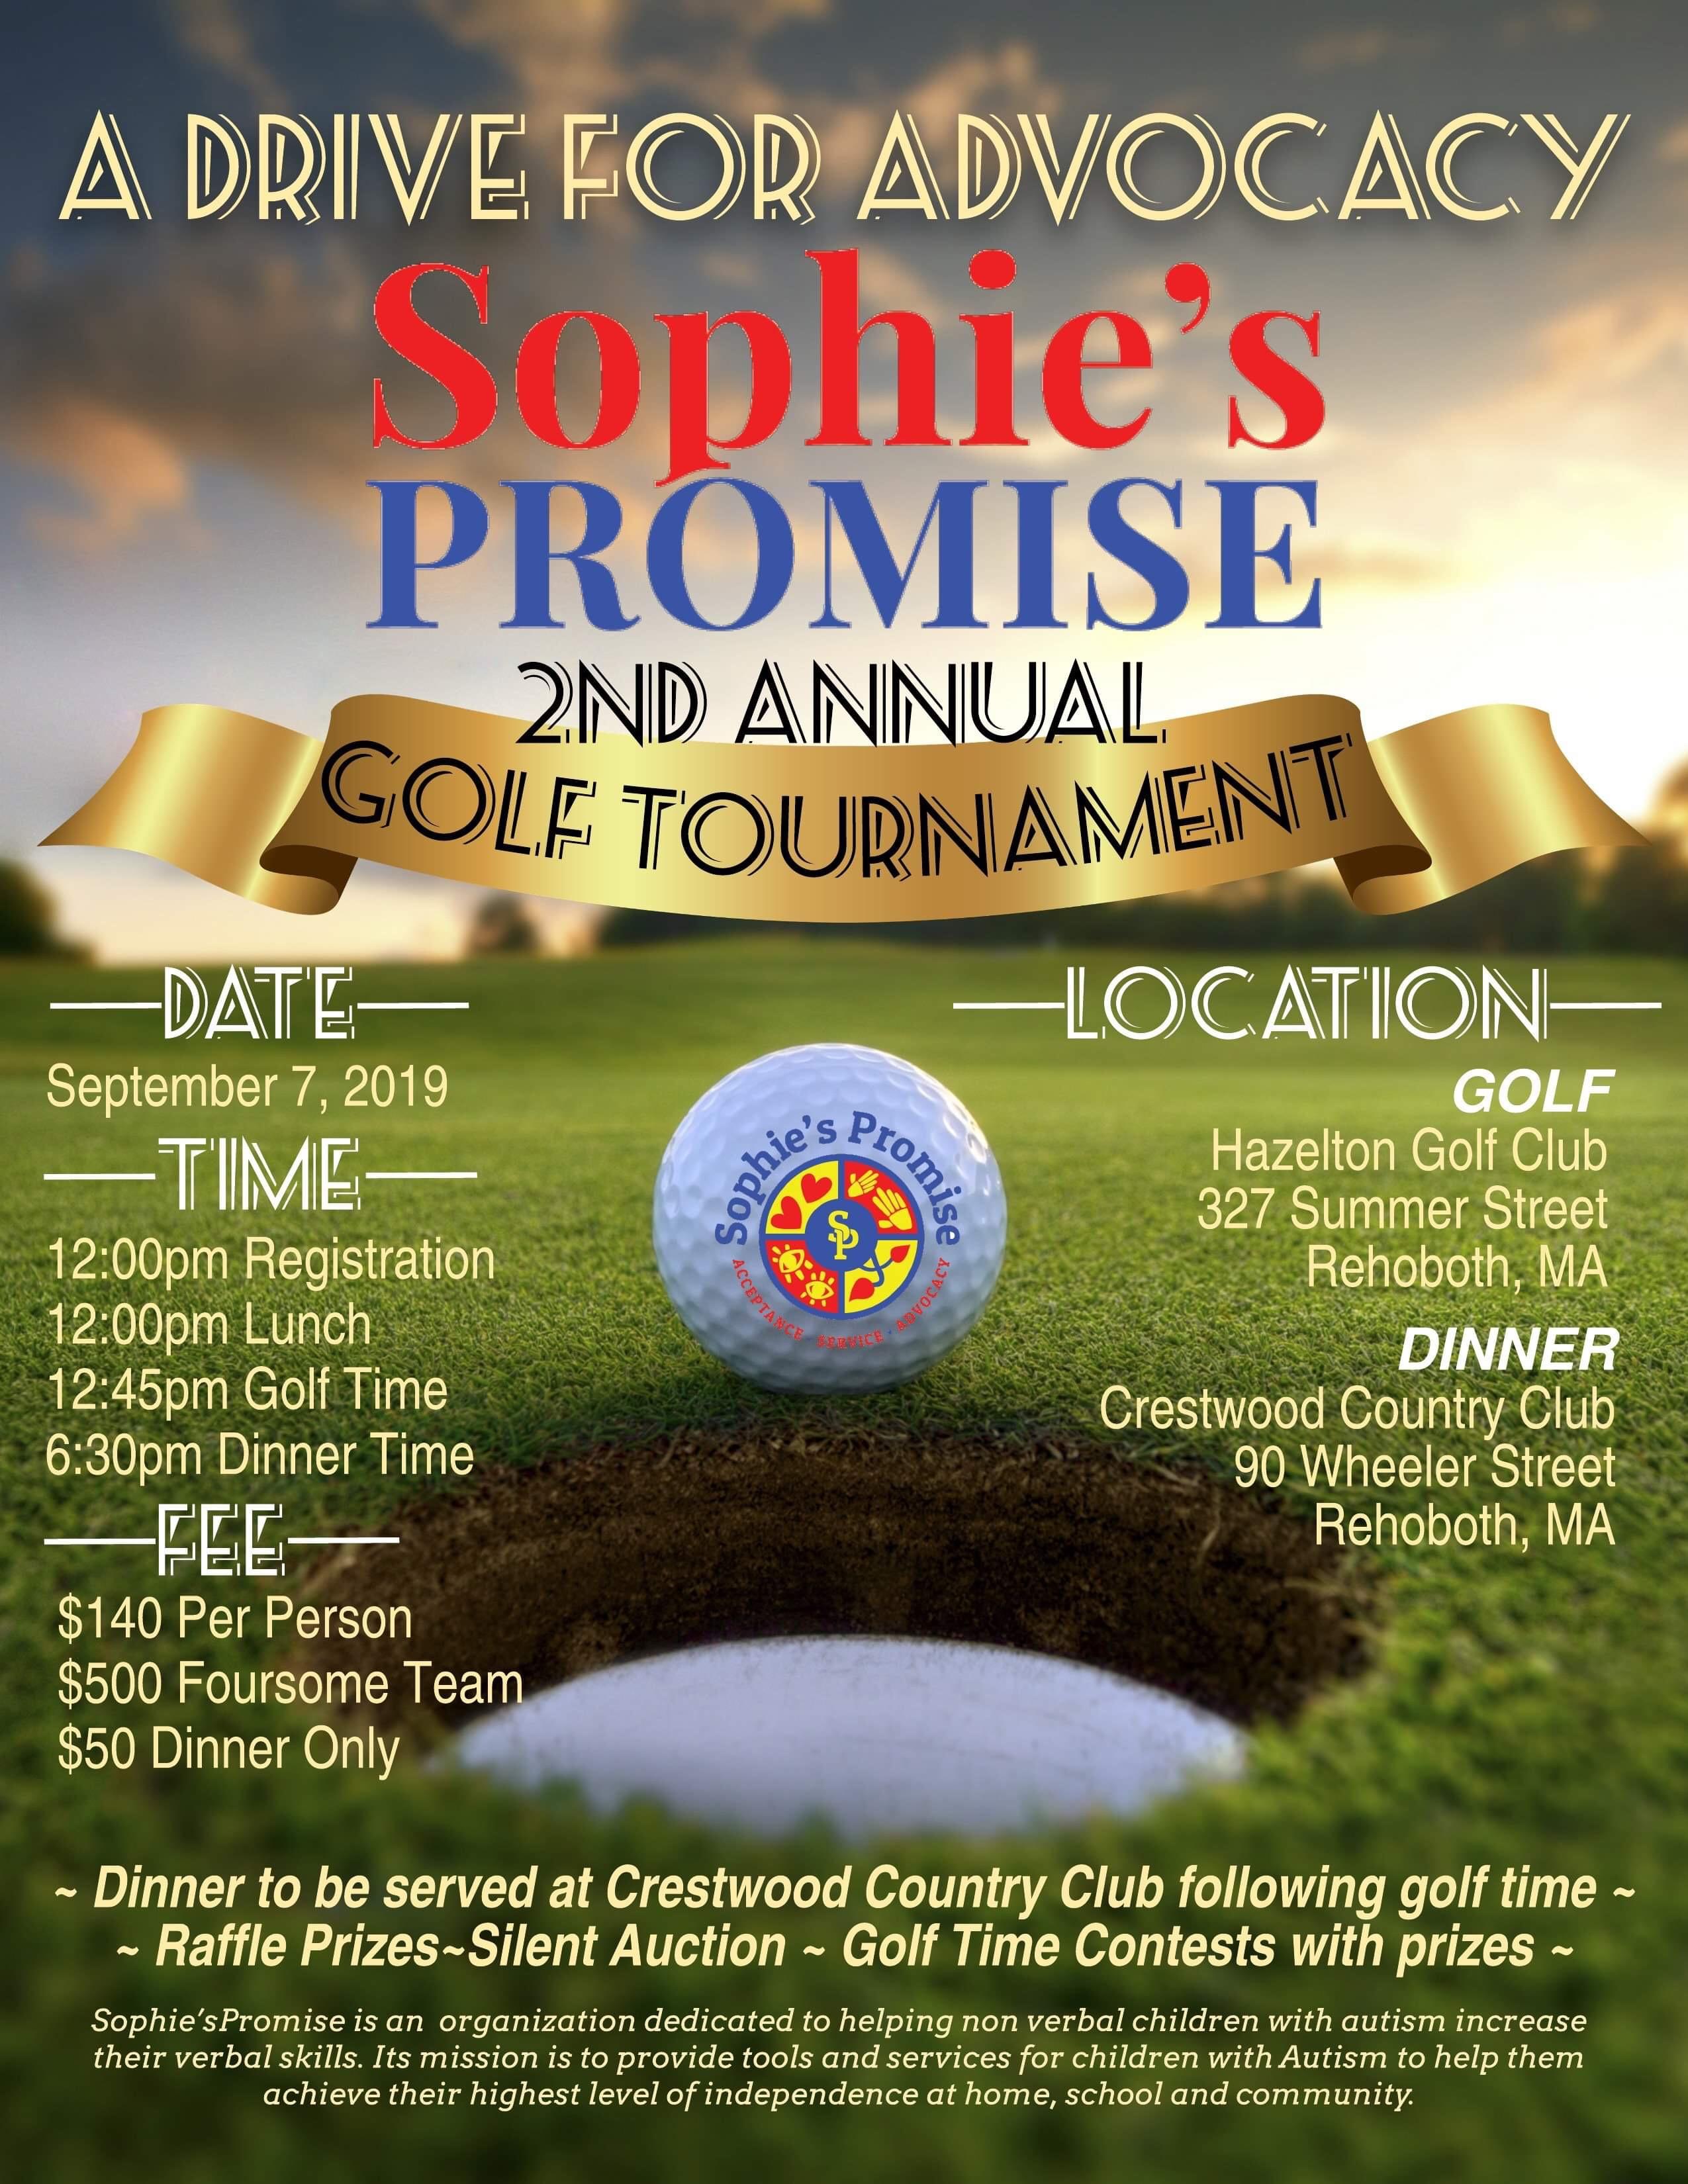 Sophie’s Promise 2nd Annual Golf Tournament - A Drive For Advocacy Dinner